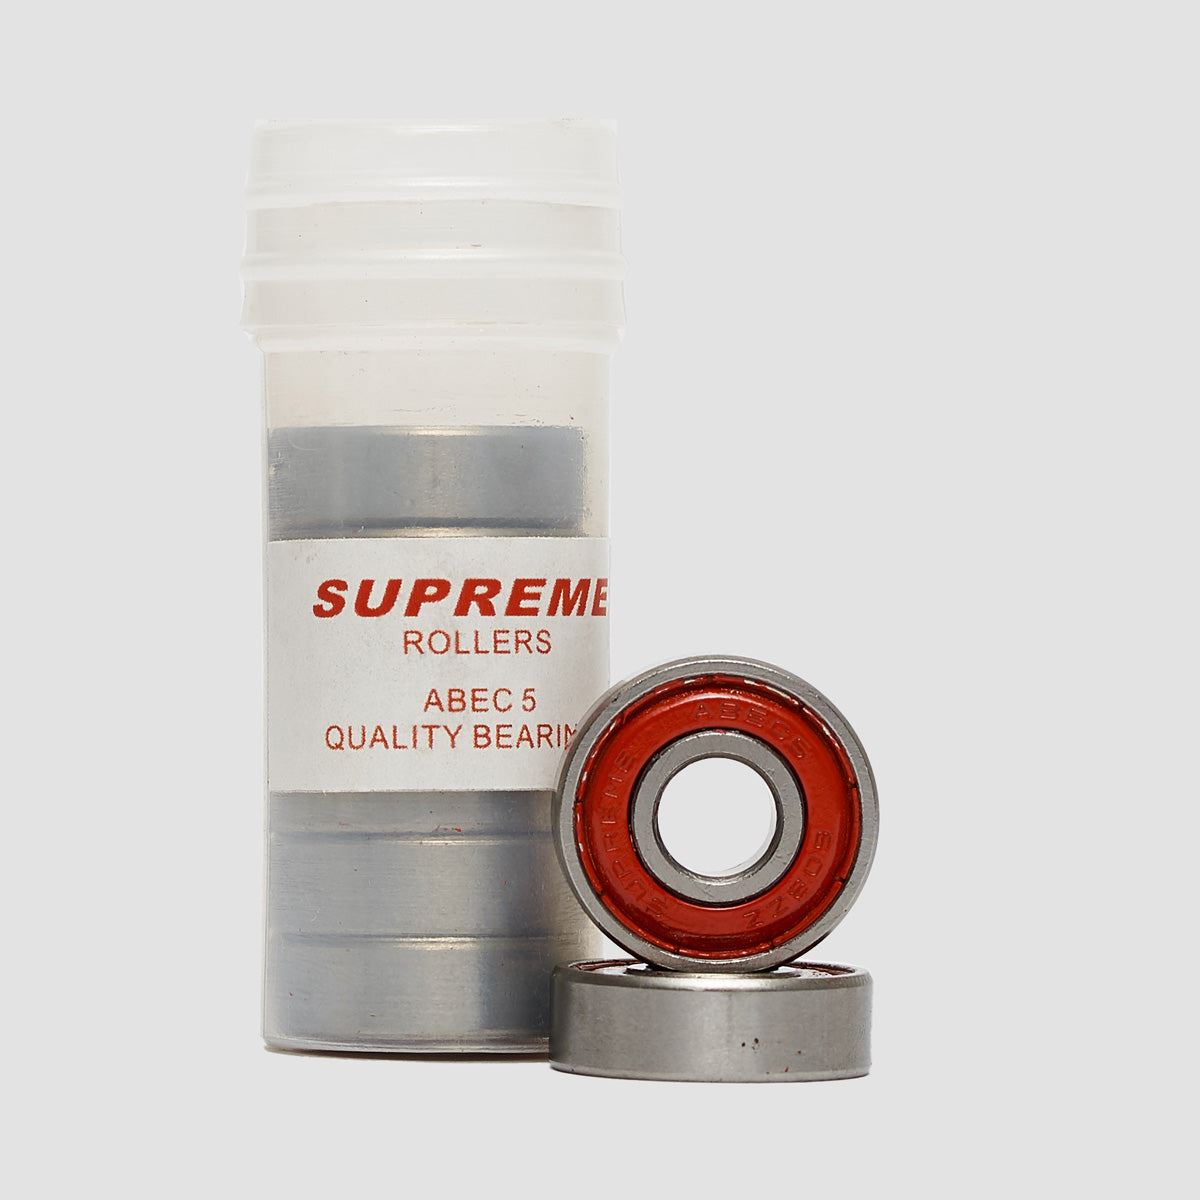 Supreme Rollers Abec 5 Bearings x8